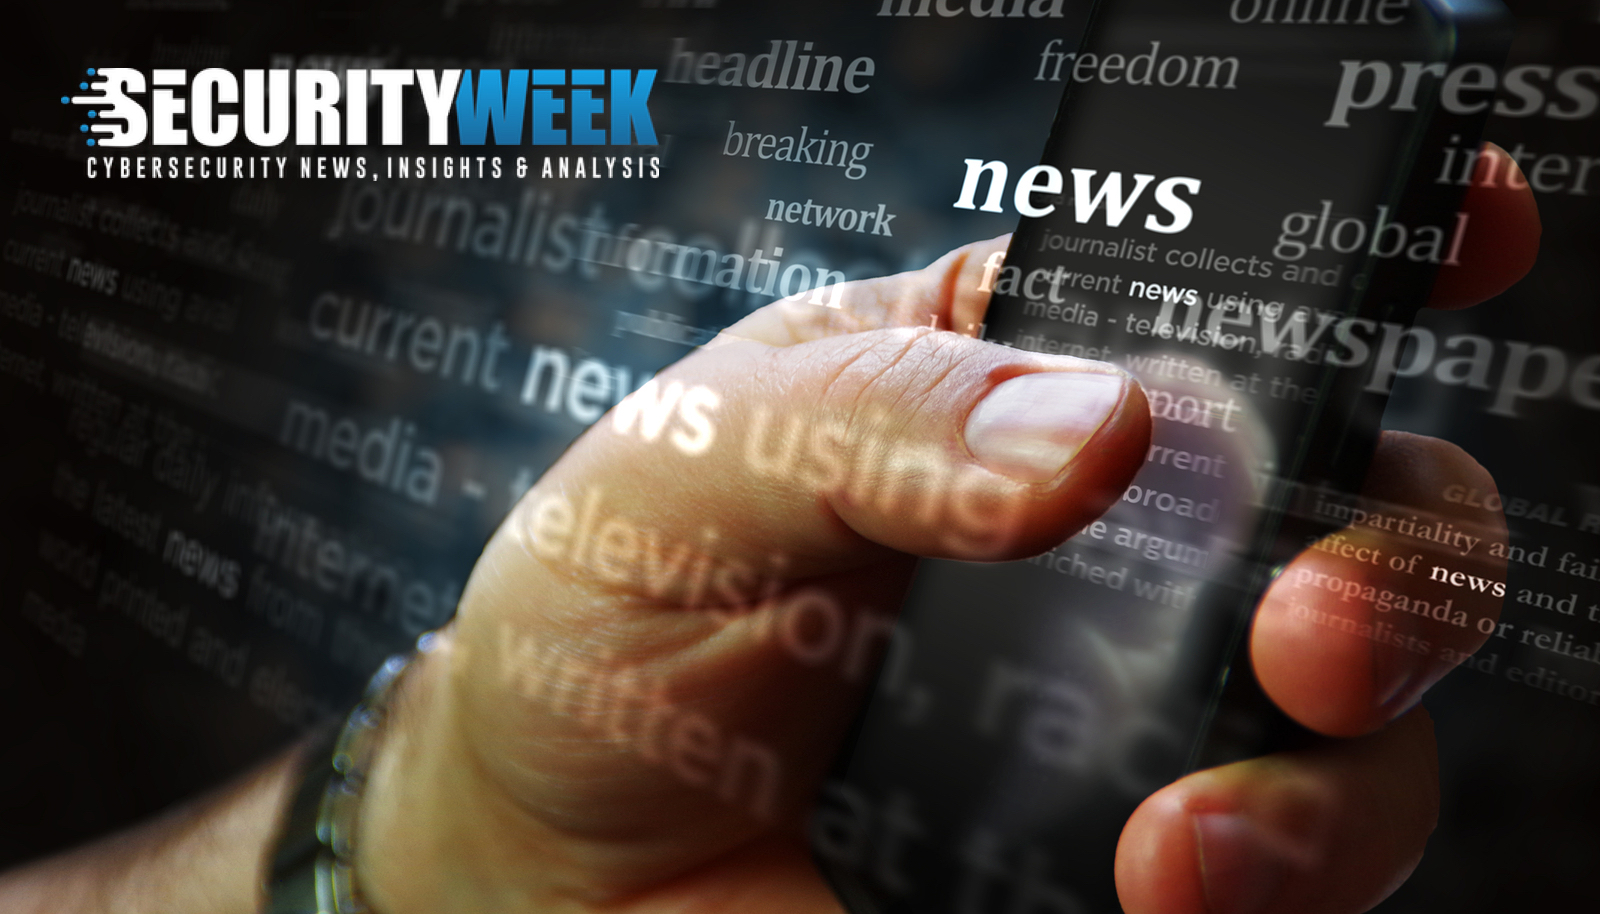 In Other News: Africa Cybercrime Crackdown, Unpatched macOS Flaw, Investor Disclosures – Source: www.securityweek.com